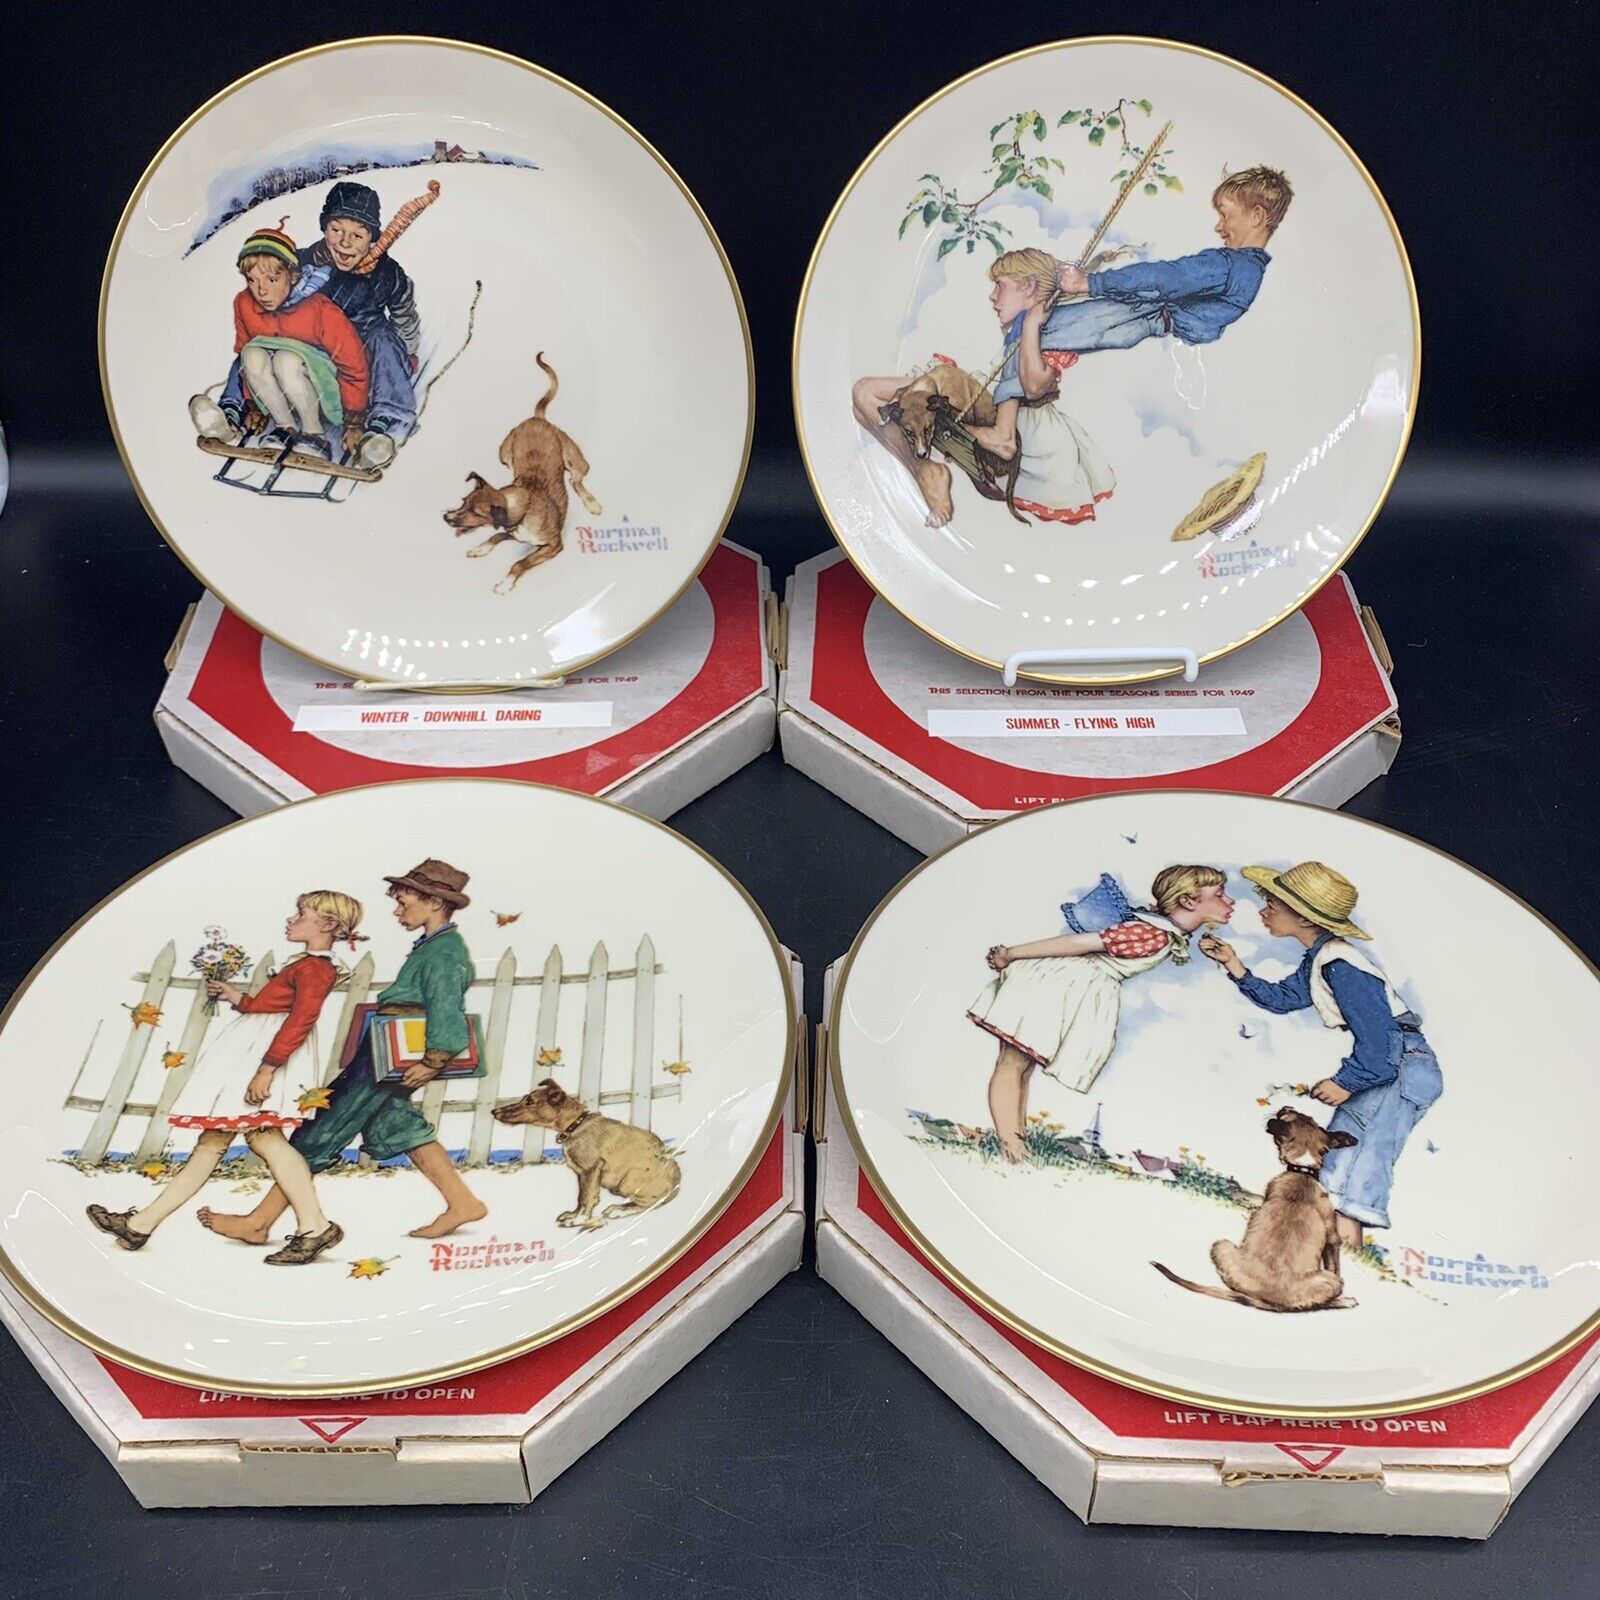 VTG 1972 Norman Rockwell Four Seasons Limited Edition Plates in Boxes (set of 4)